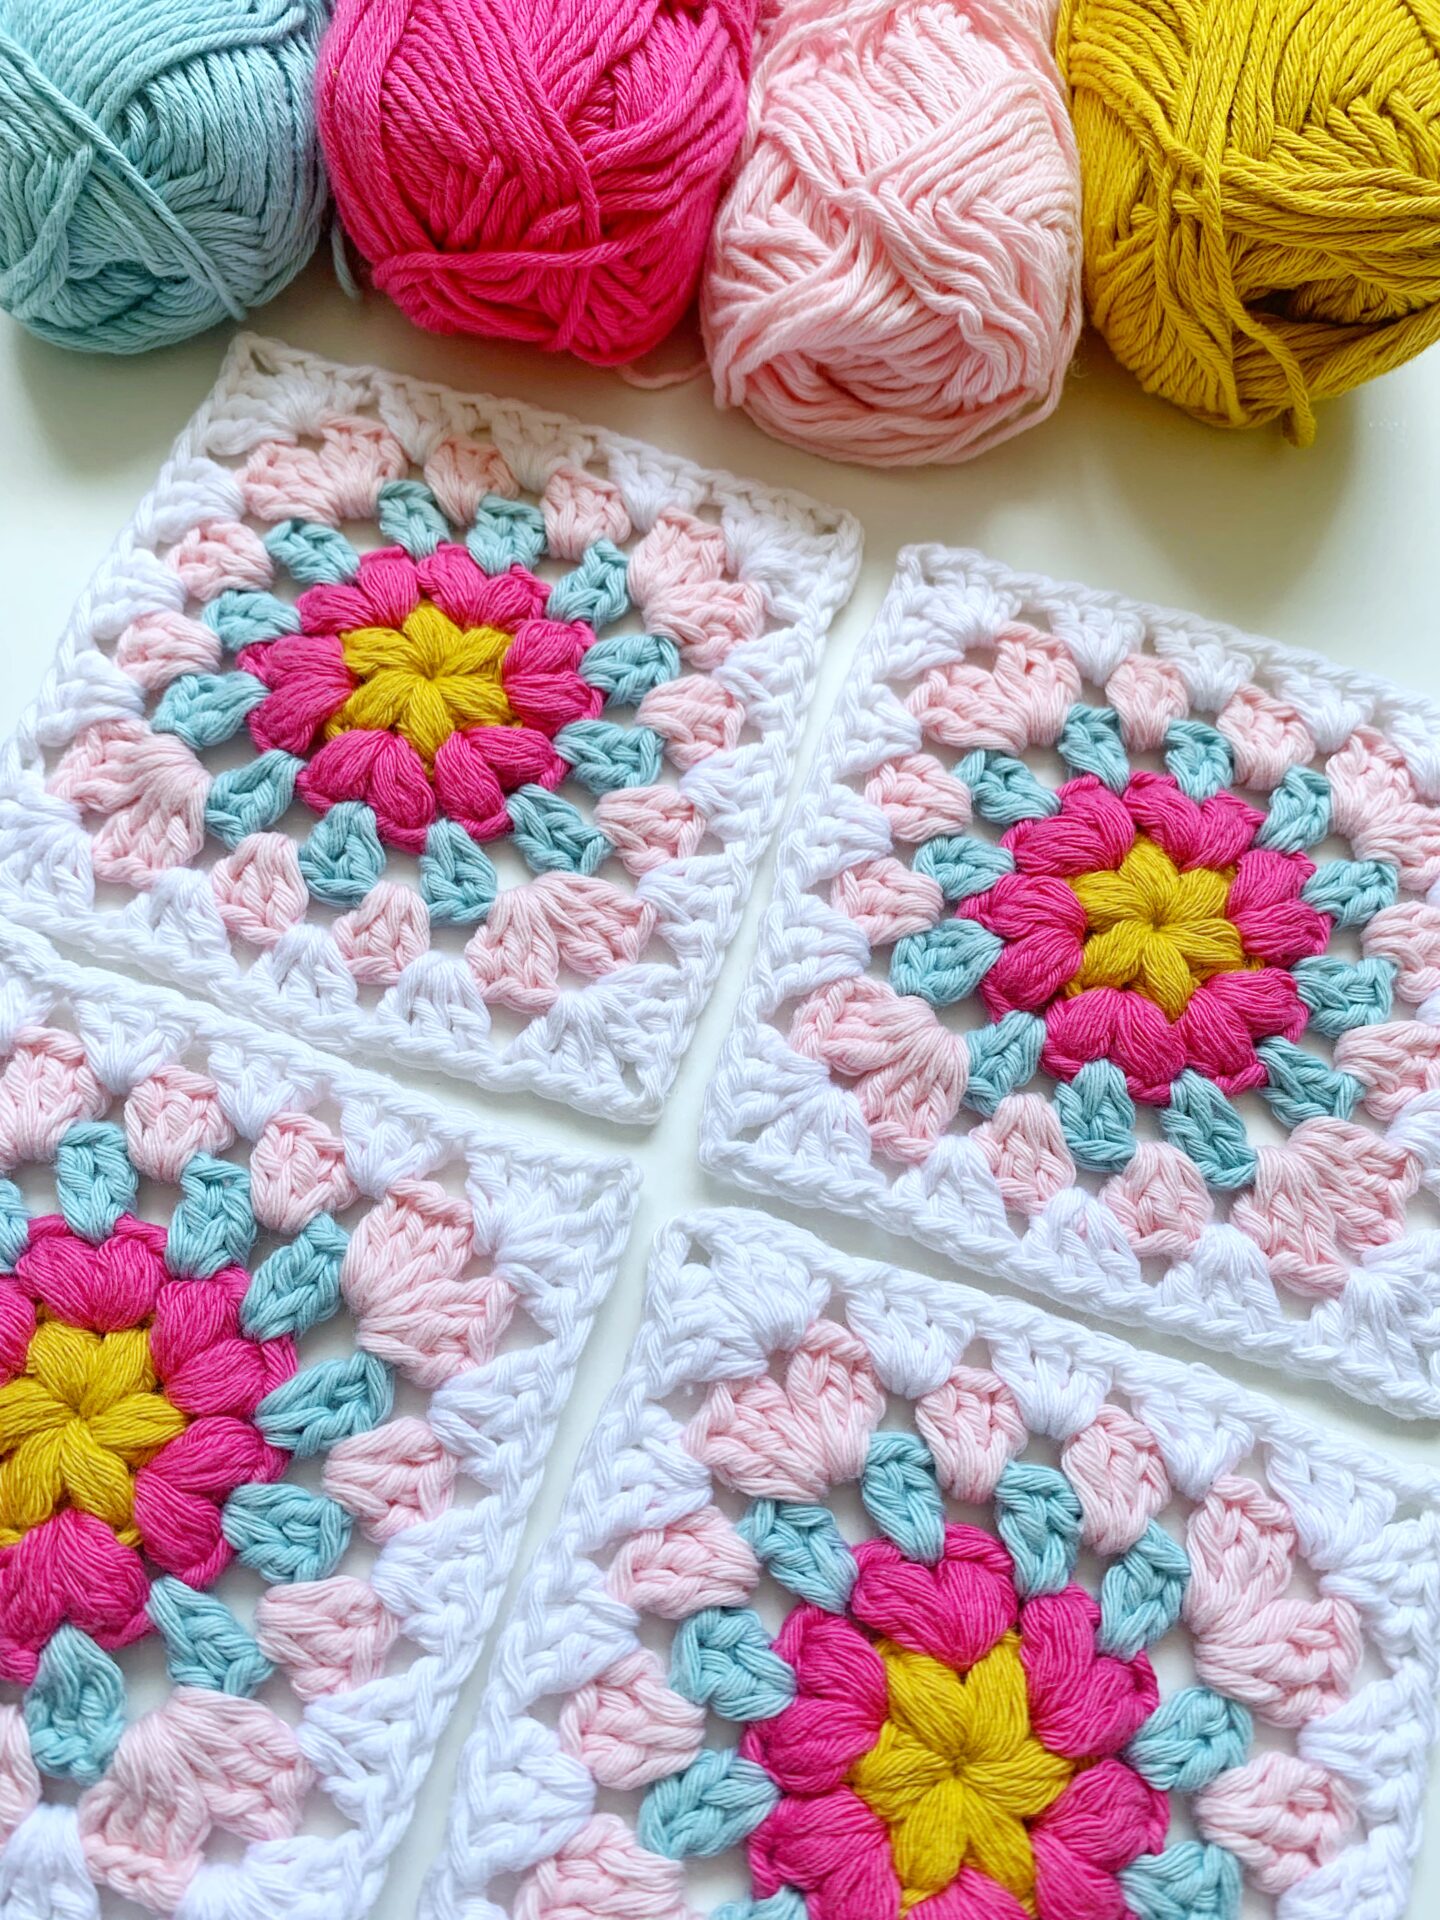 Pattern for this Flower (Granny) Square? : r/crochetpatterns